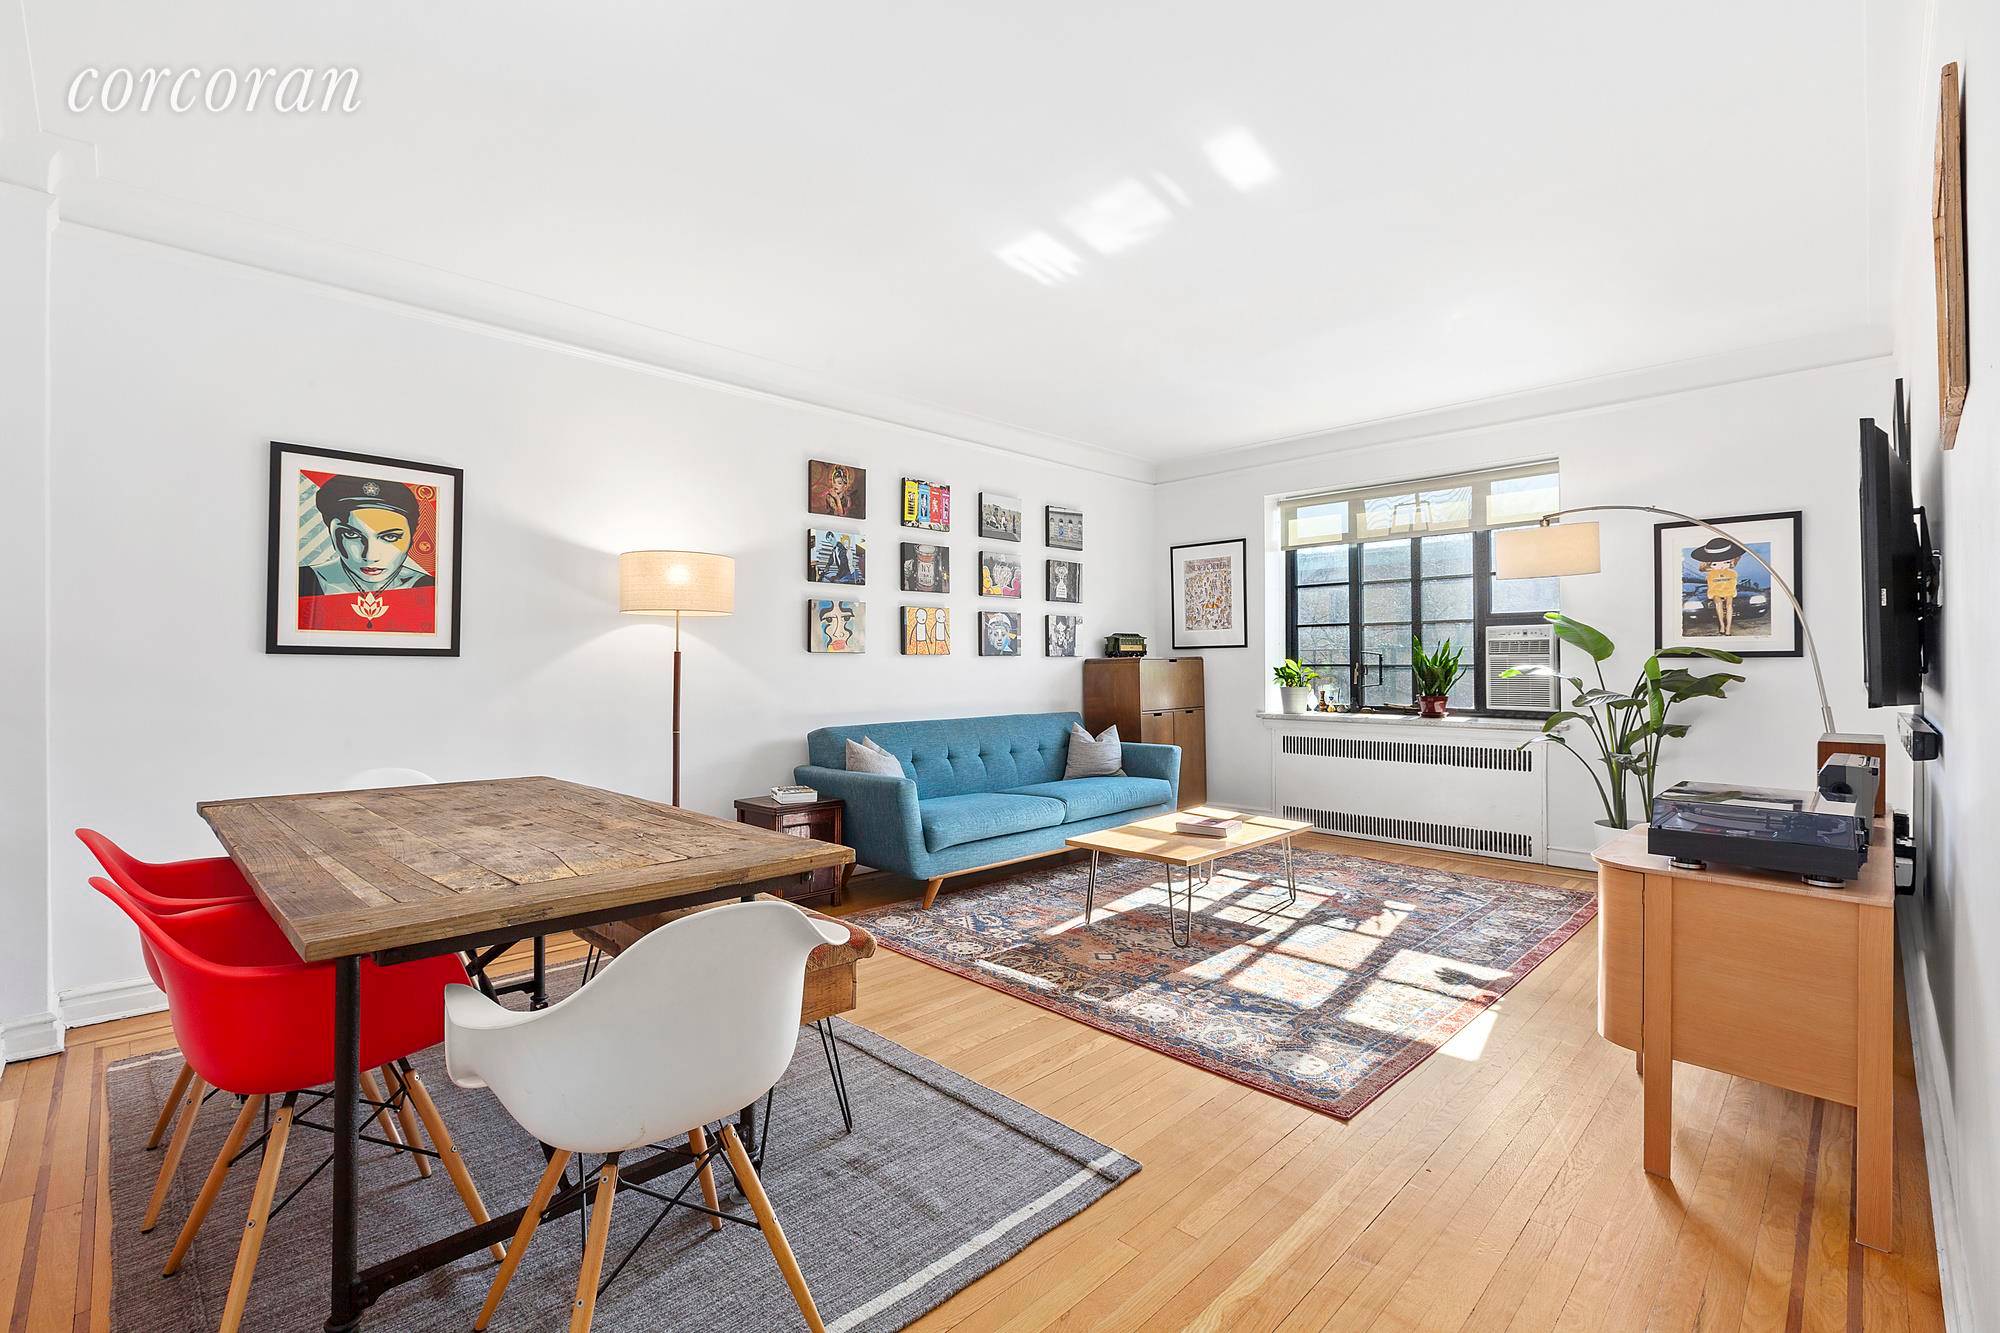 Accepted Offer. This expansive one bedroom prewar coop is flawlessly located in prime North Slope, just 3 short blocks from Prospect Park !